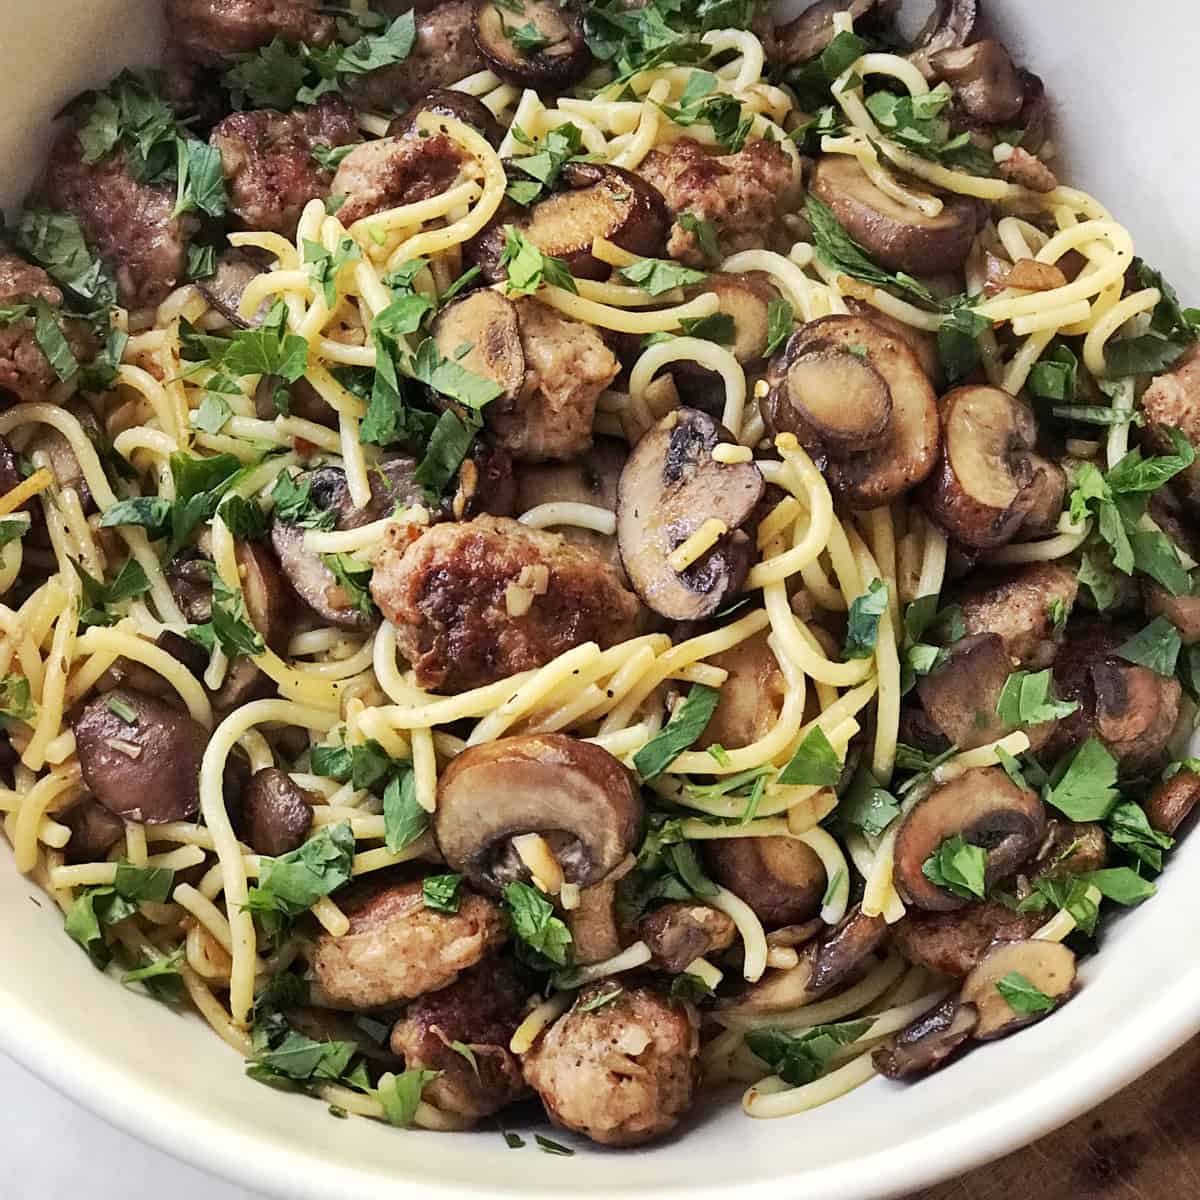 Spaghetti with mushrooms and sausage in a white bowl